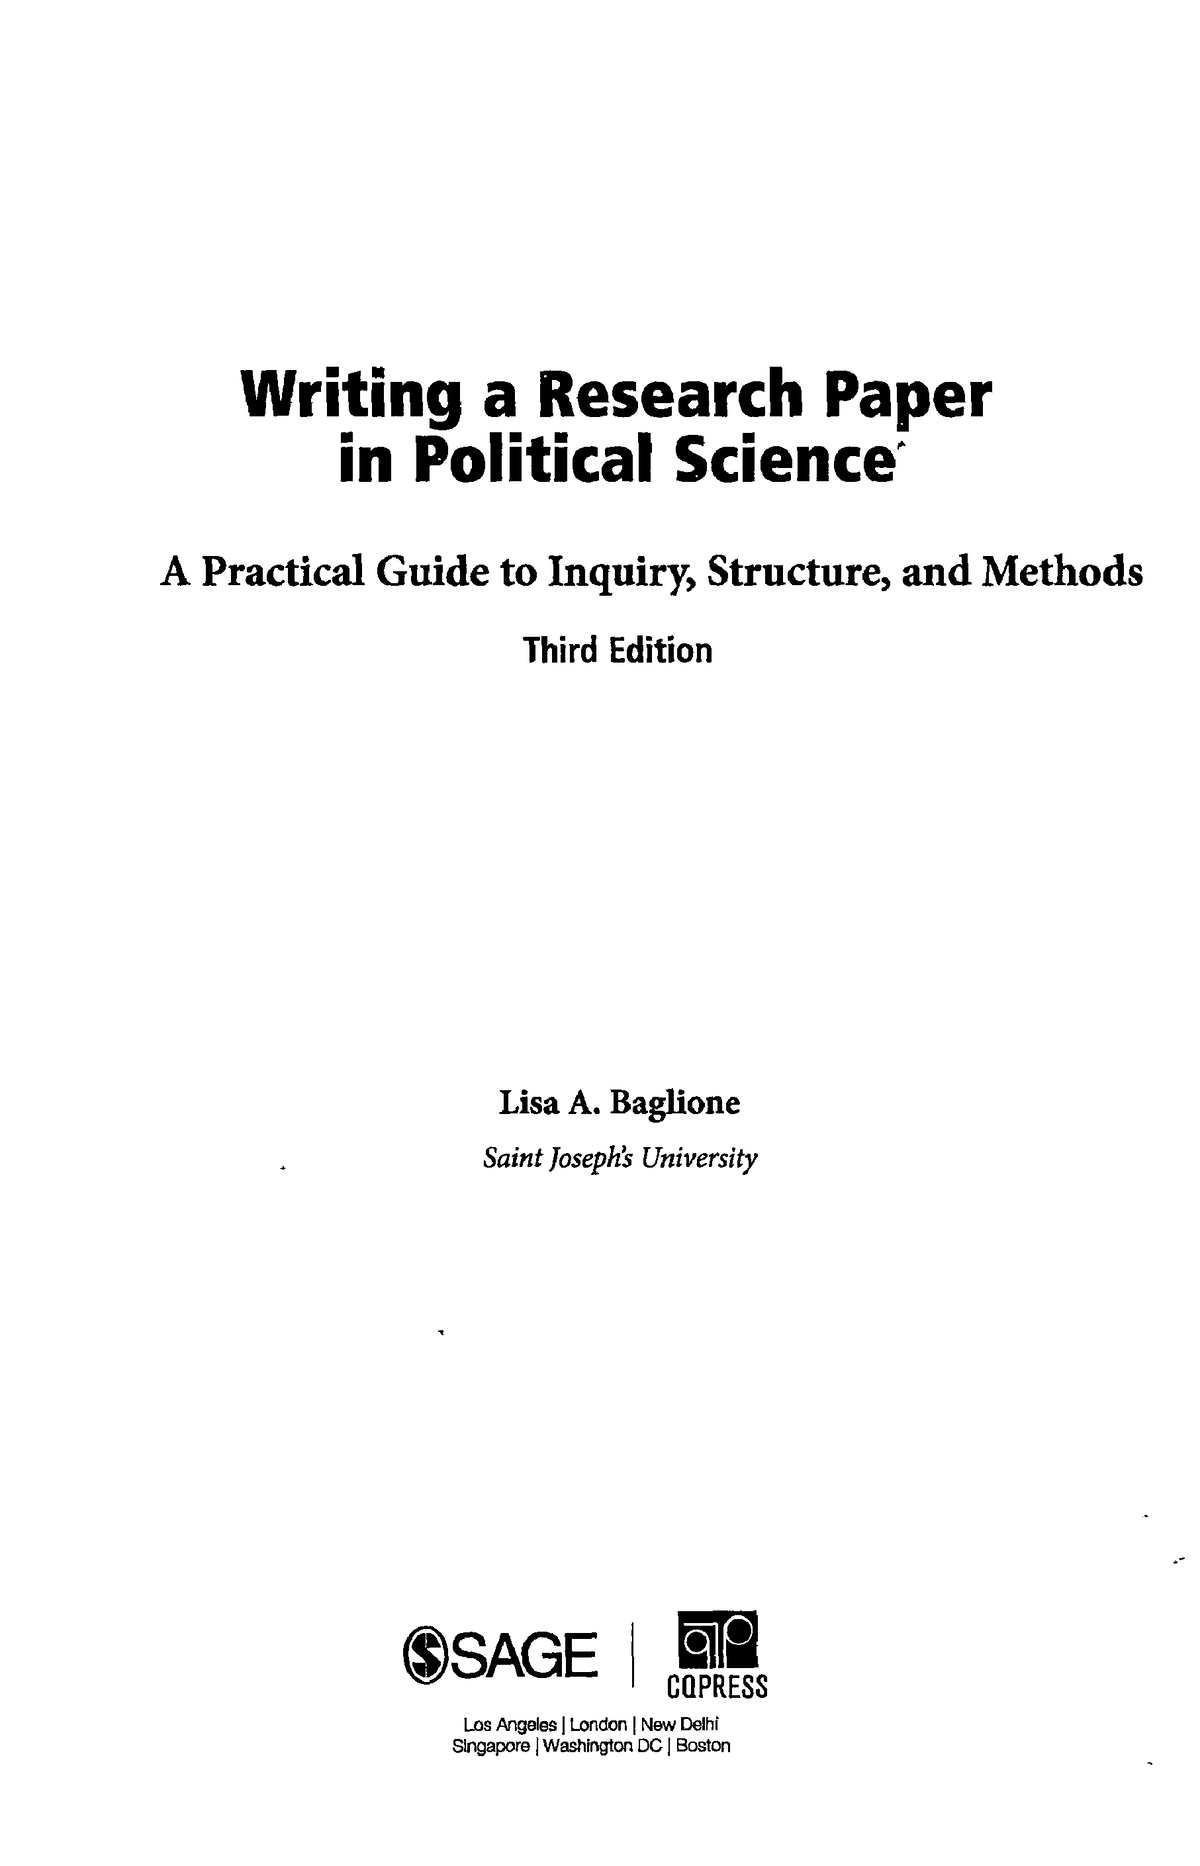 how to structure a political science research paper